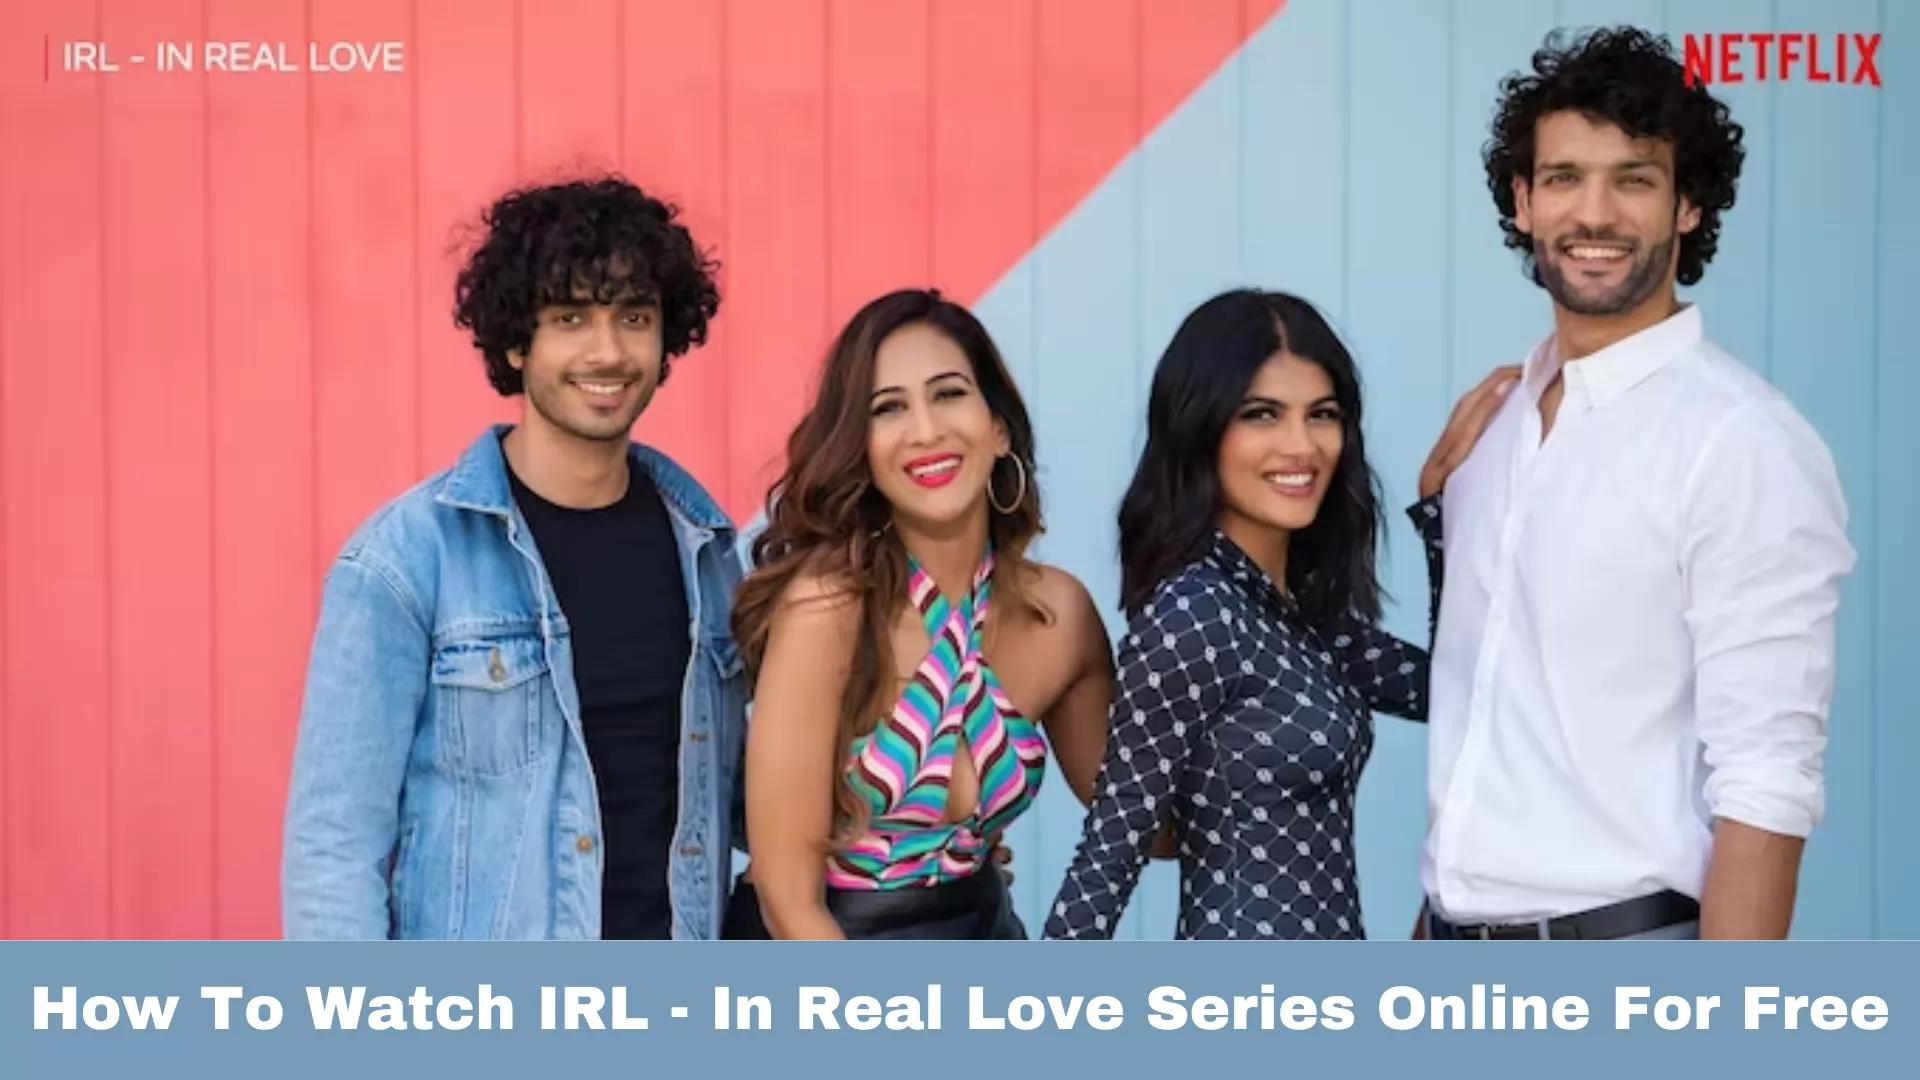 How To Watch IRL - In Real Love Series Online For Free?